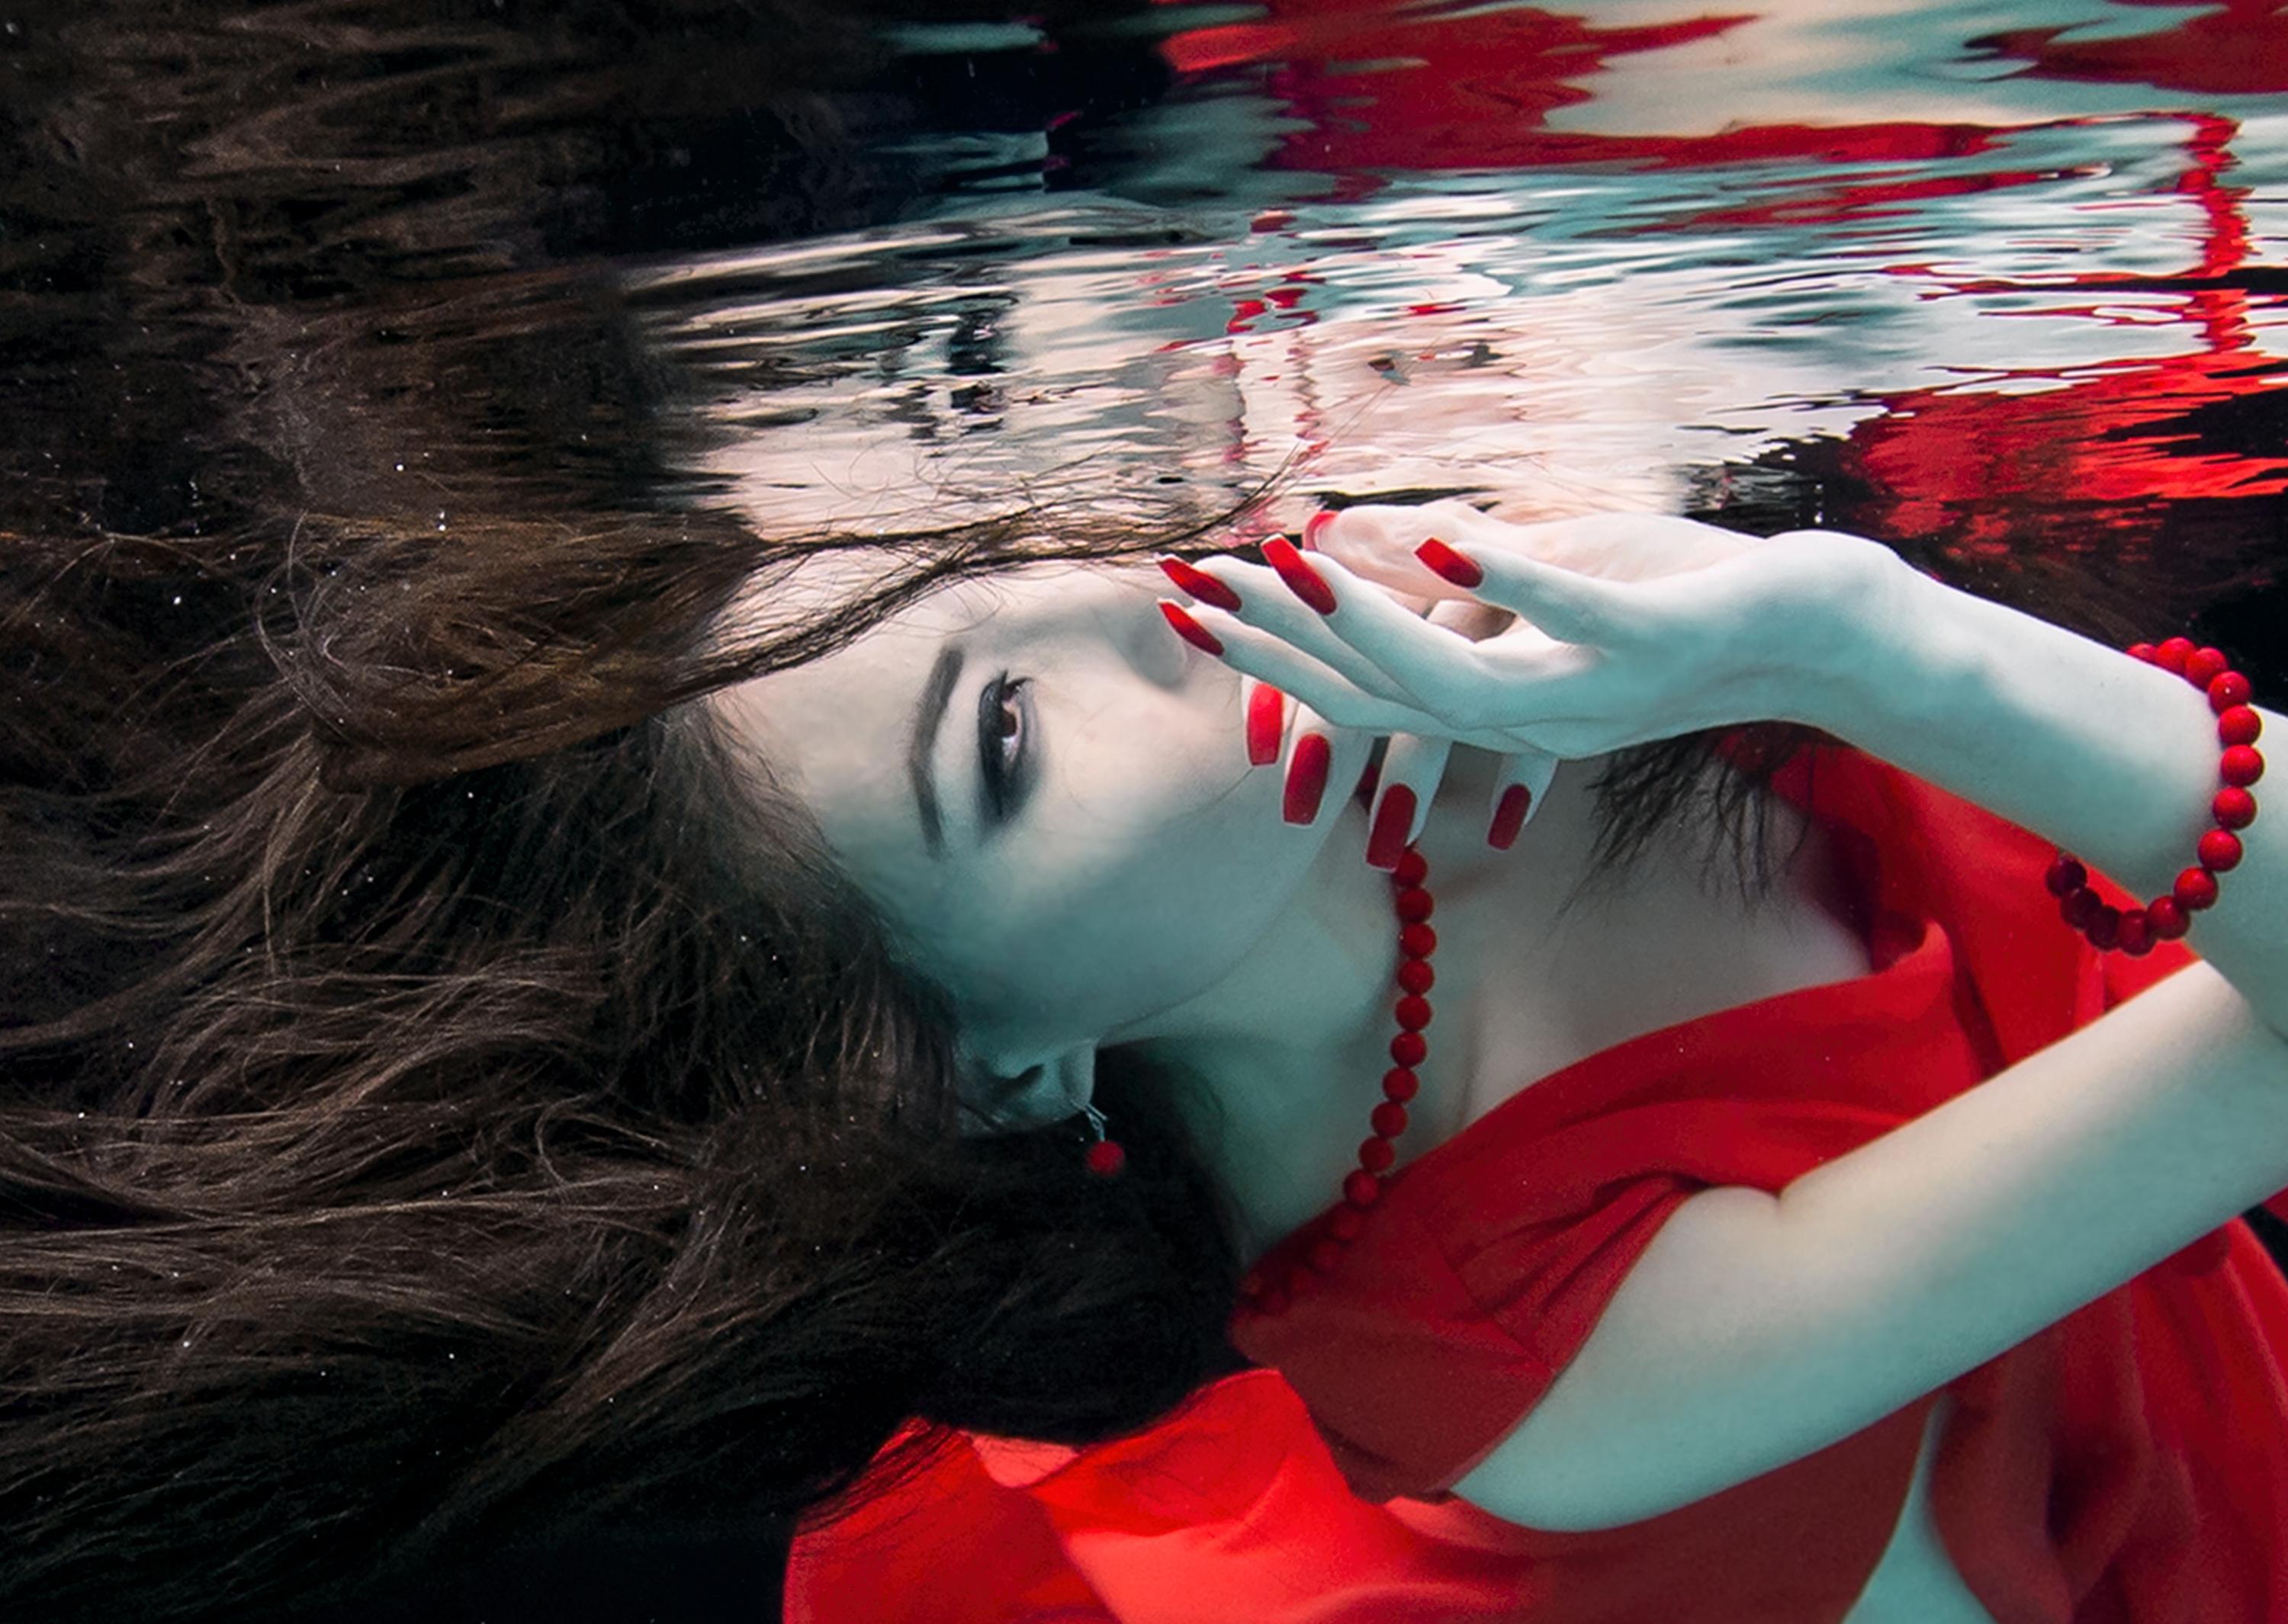 Underwater photograph of a gorgeous girl with dark hair in red dress.

Original gallery quality print on archival metallic paper signed by the artist.
Paper size: 18